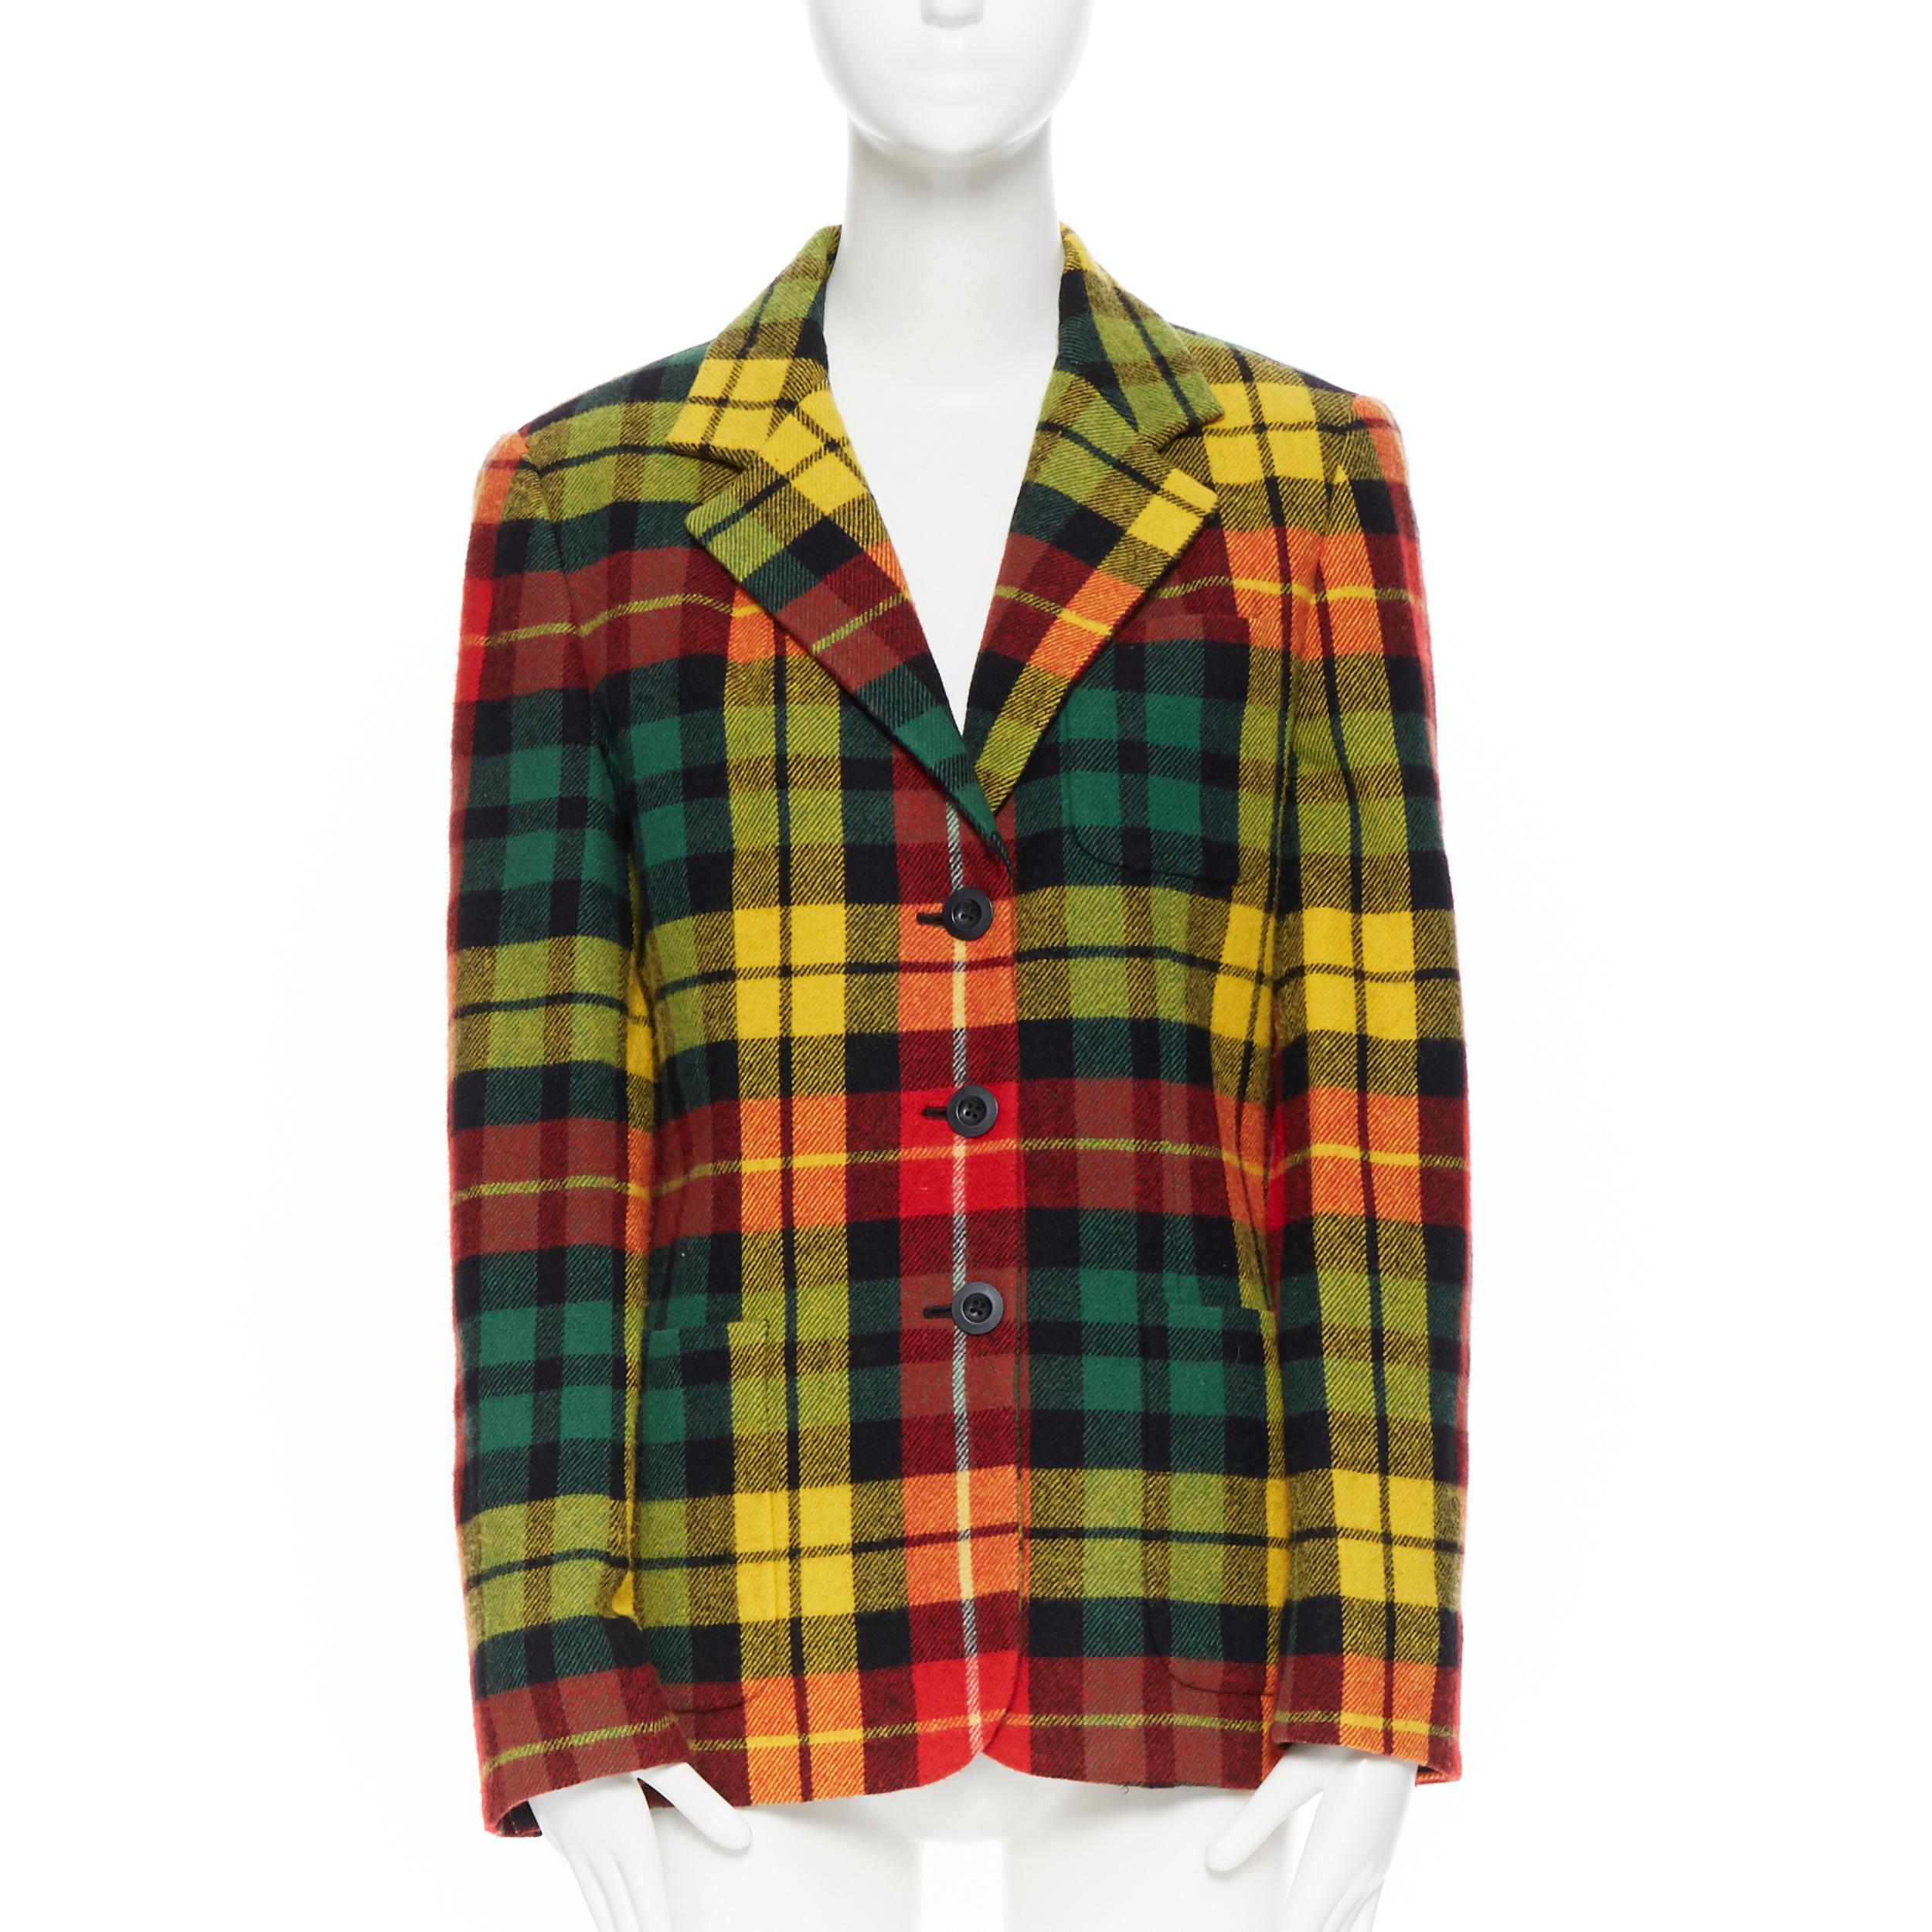 DKNY JEANS Vintage 100% wool red green plaid notched lapel jacket US6 
Reference: CNPG/A00021 
Brand: DKNY 
Material: Wool 
Color: Multicolour 
Pattern: Plaid 
Closure: Button 
Made in: Hong Kong 

CONDITION: 
Condition: Excellent, this item was